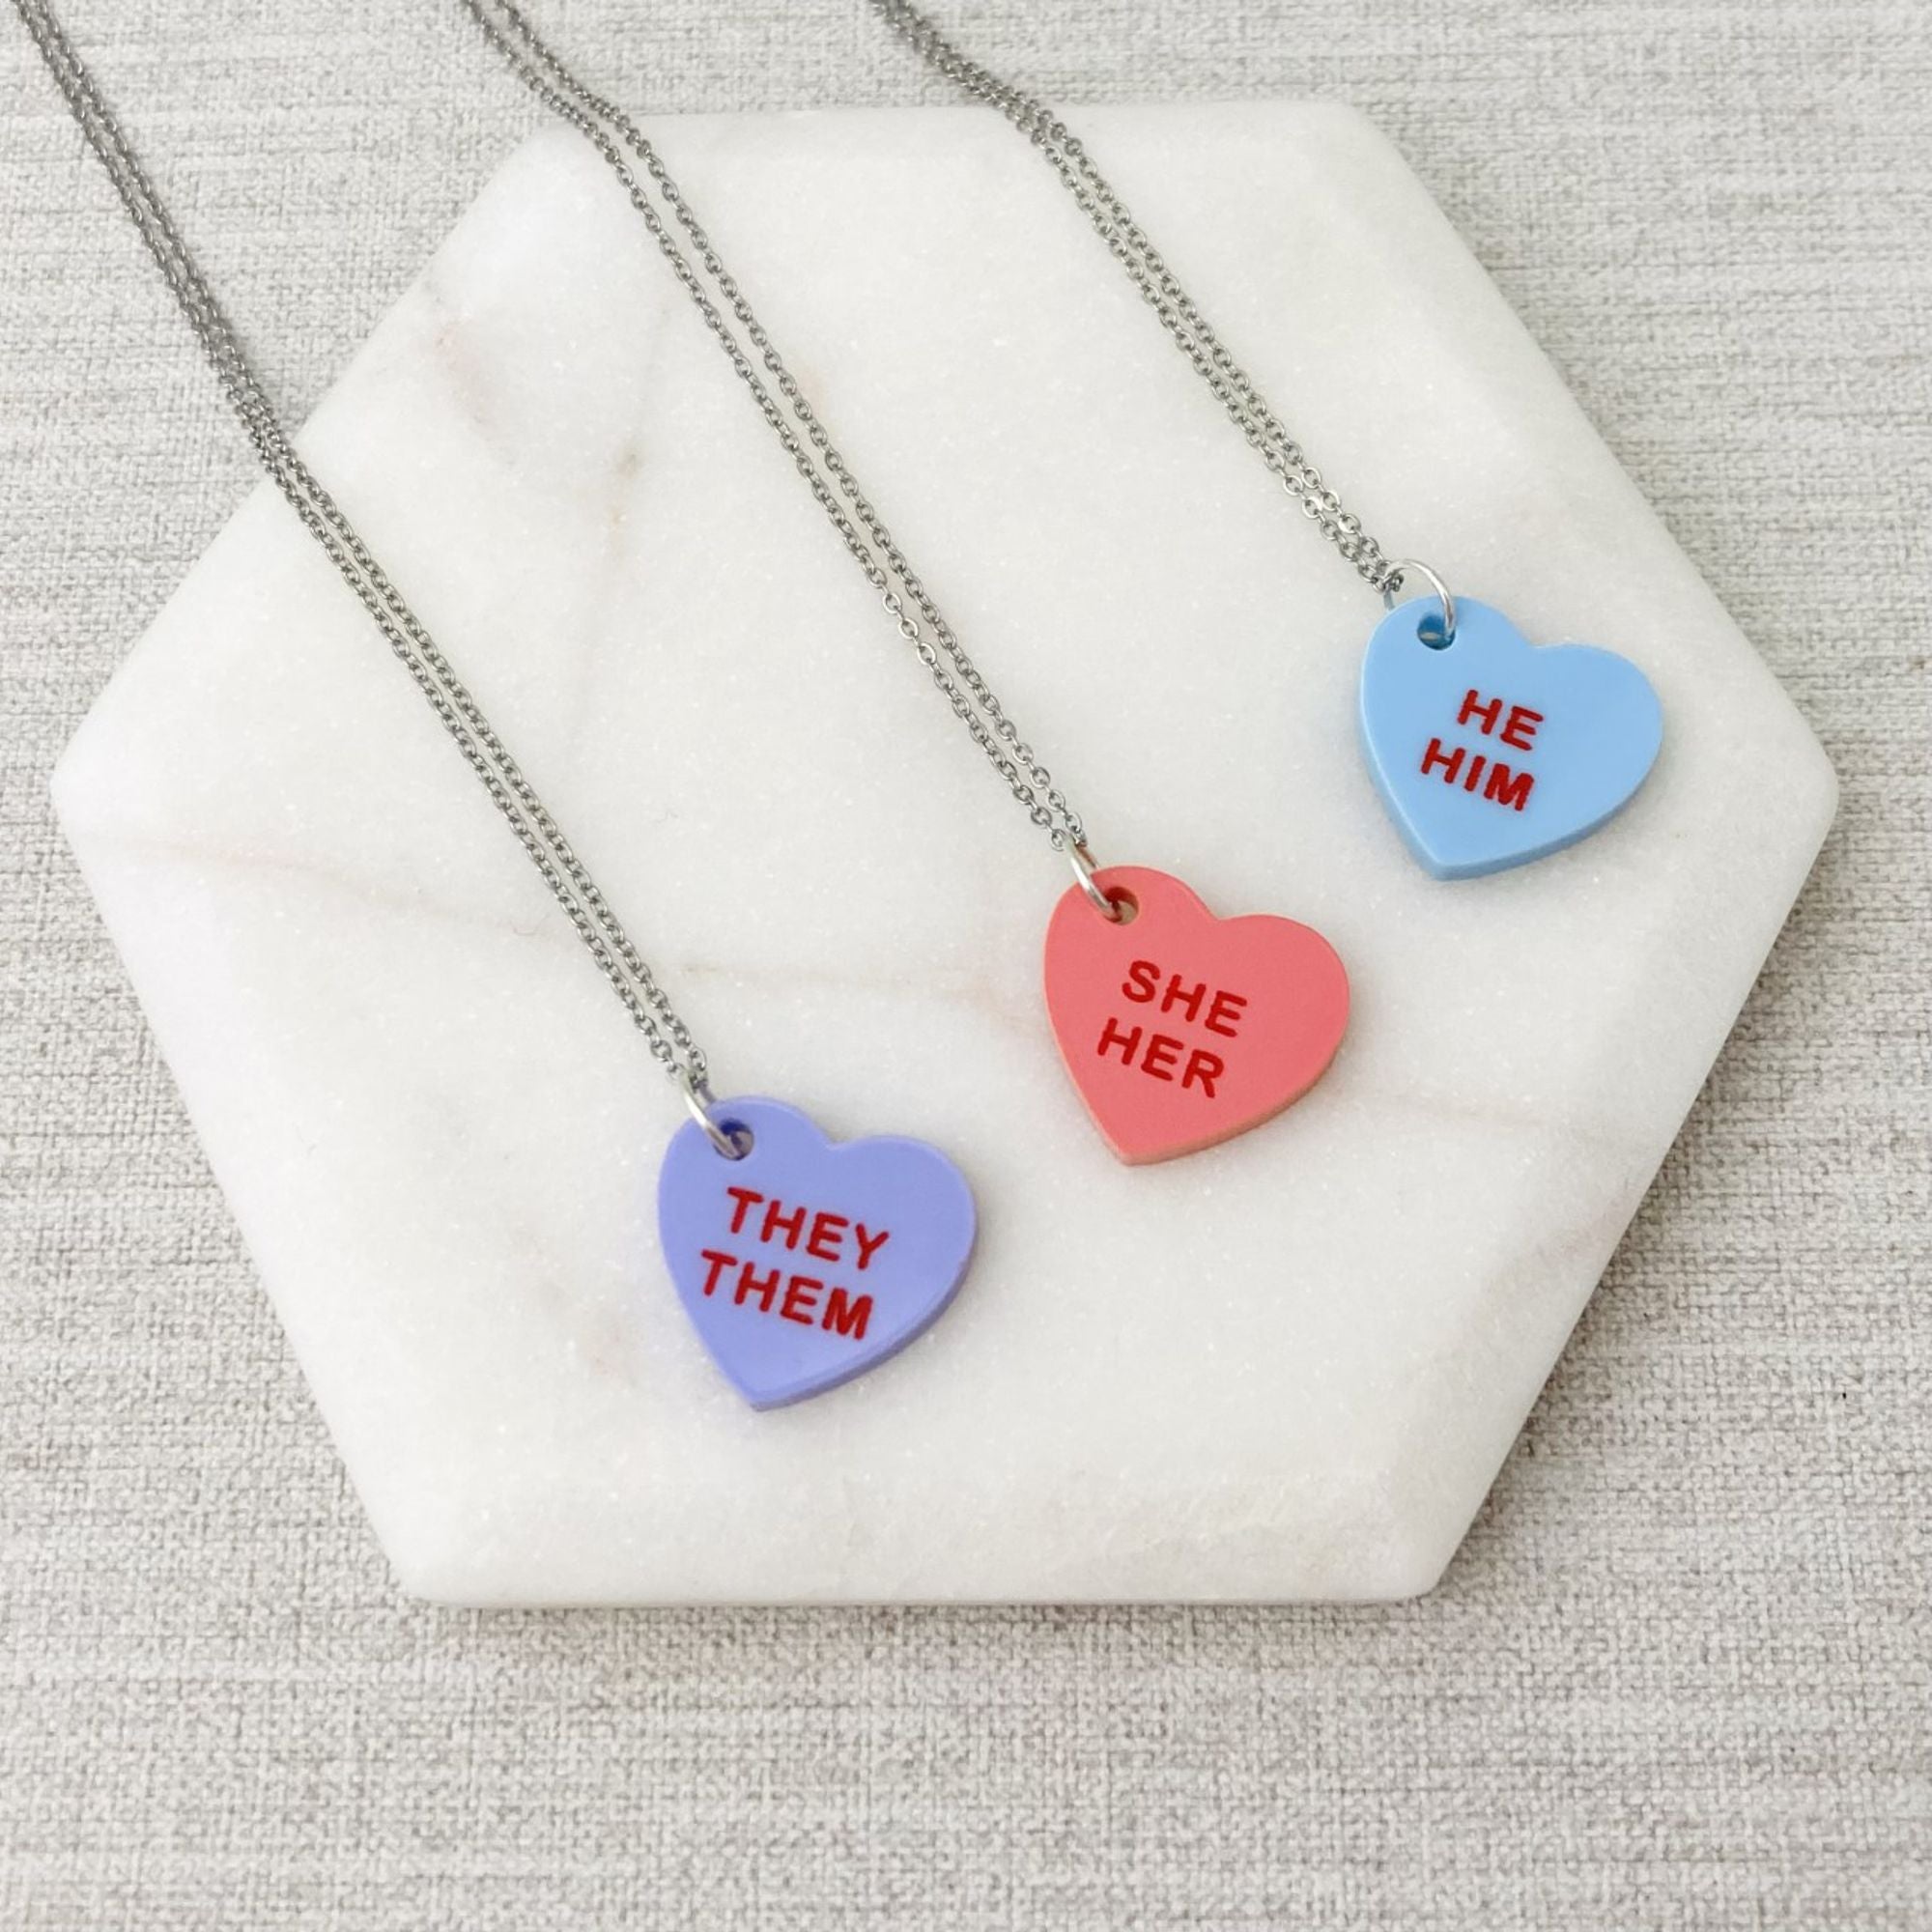 My Pronouns Are They Them Theirs Gender Identity Military Dog Tag Pendant  Necklace with Cord - Walmart.com